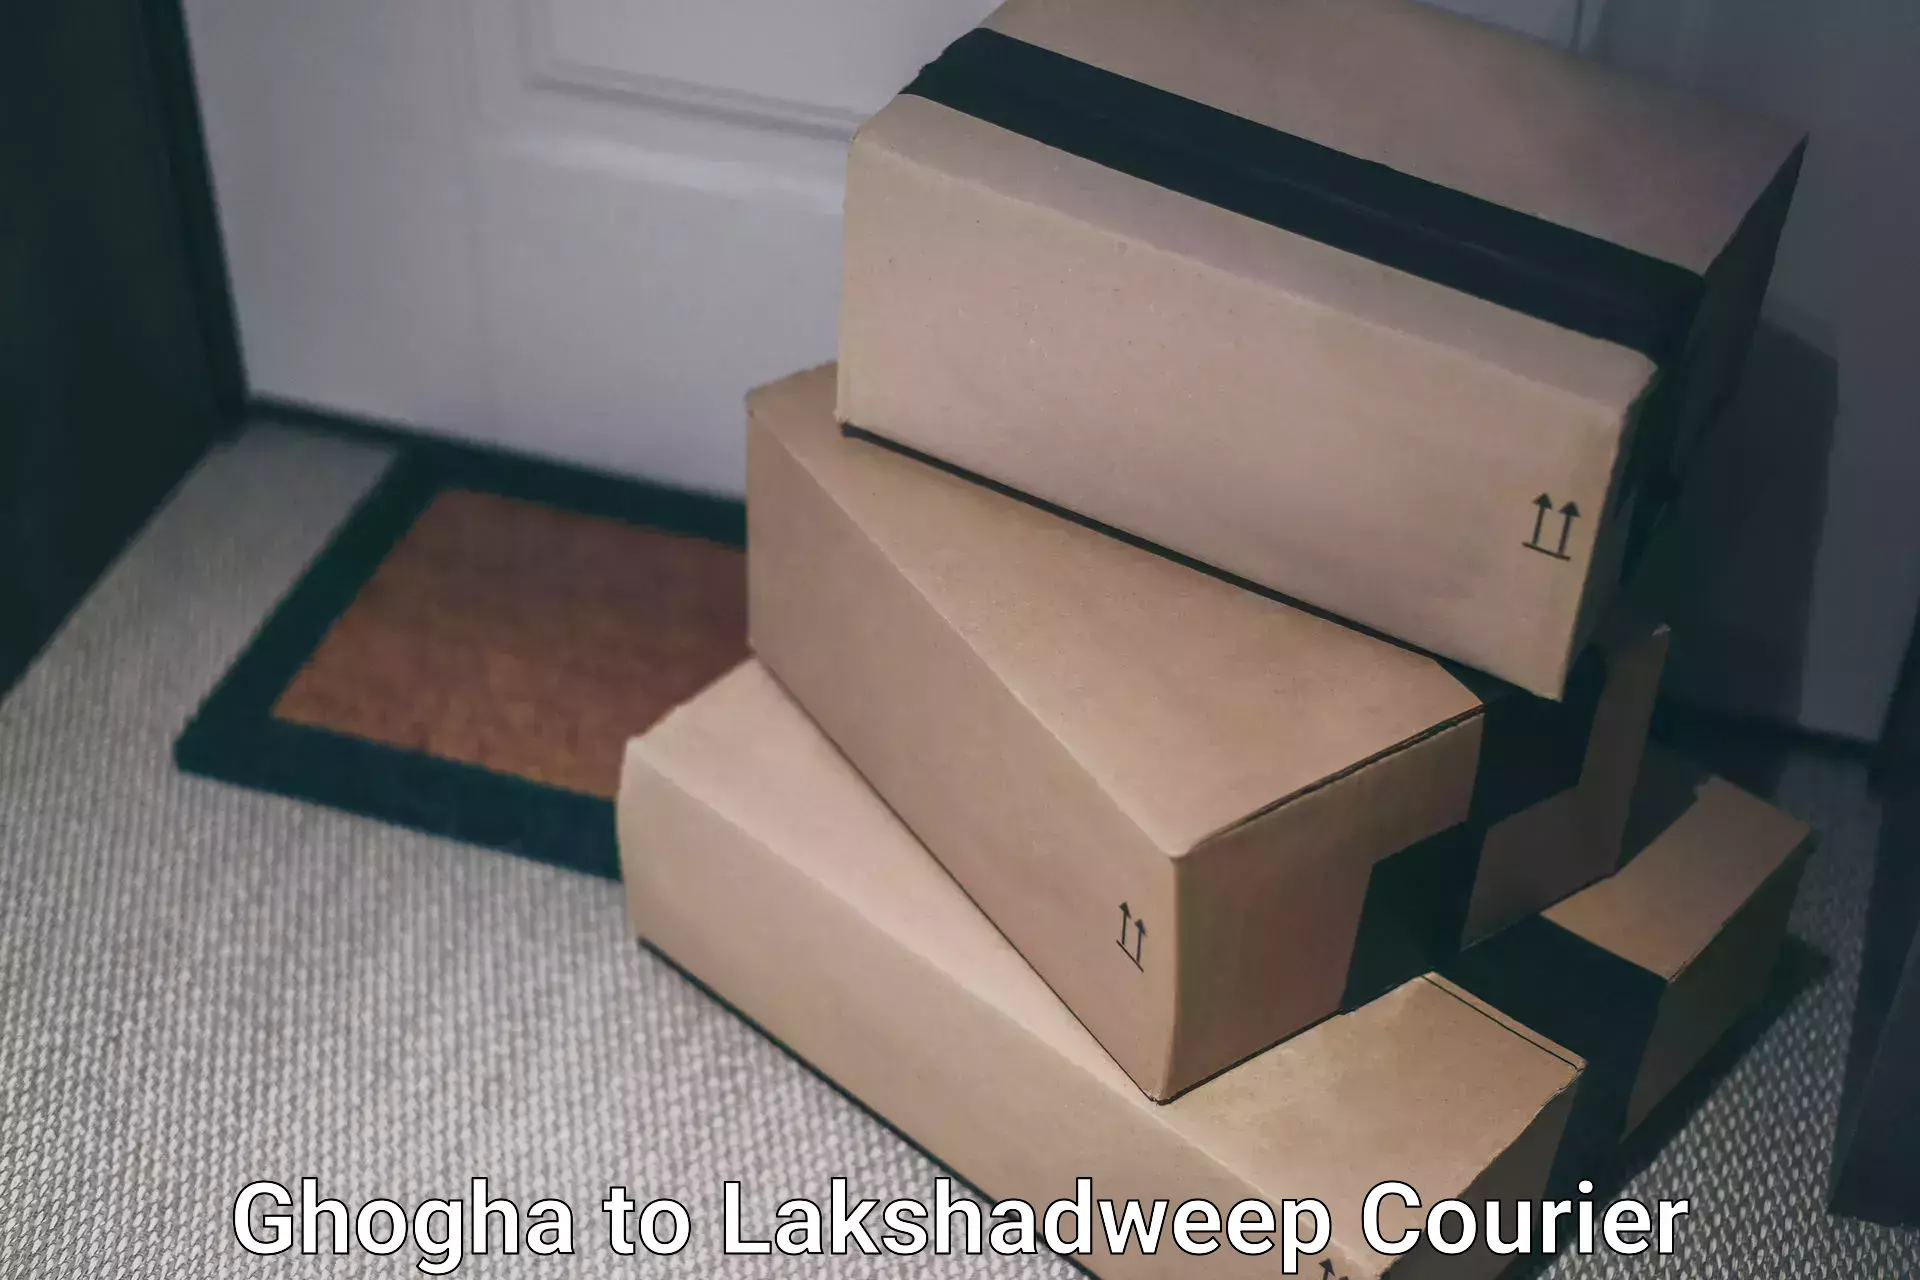 Advanced delivery network Ghogha to Lakshadweep